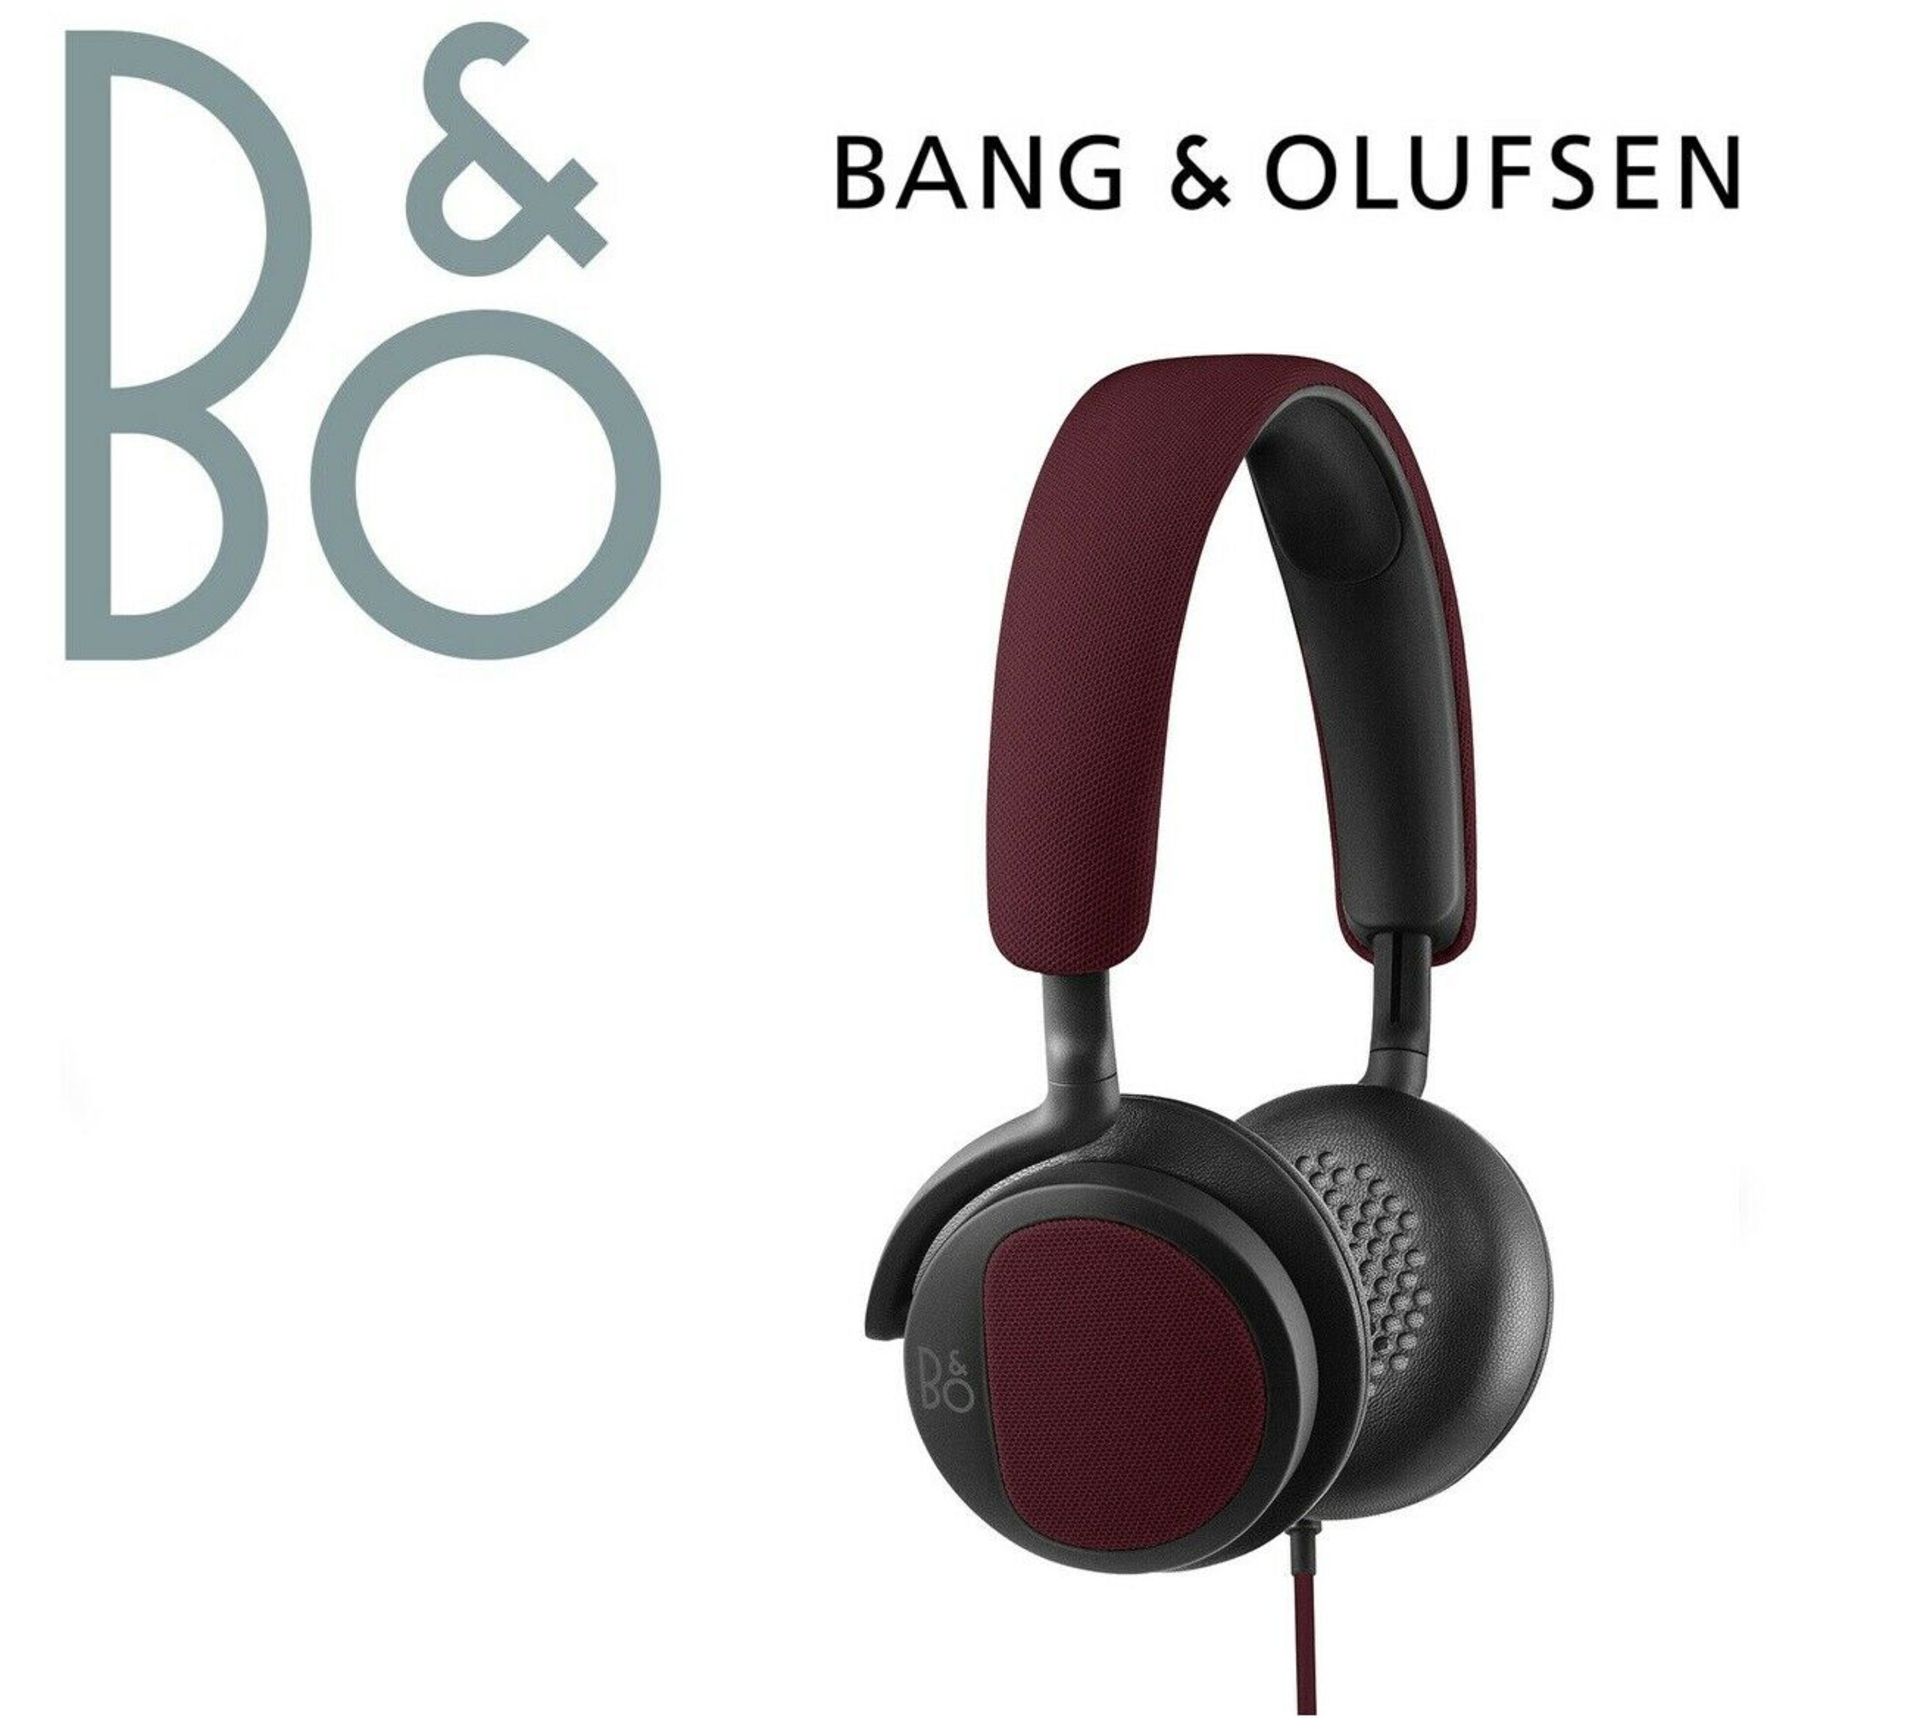 V Grade A Bang & Olufsen Beoplay H2 Deep Red On Ear Headphones